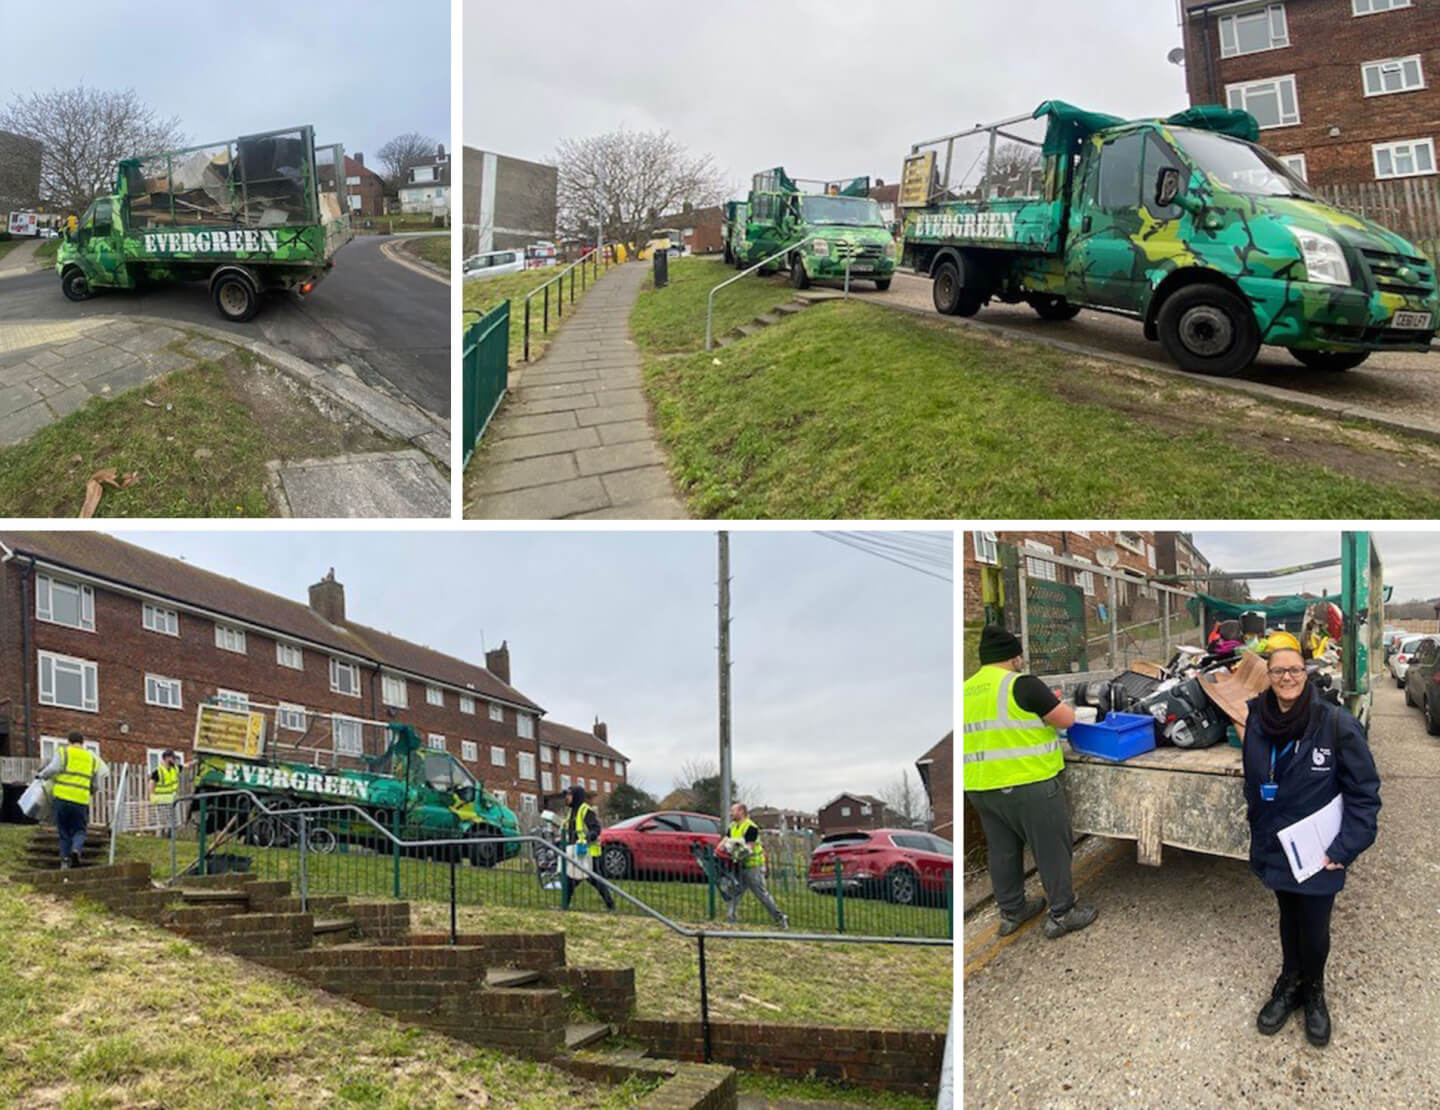 Action shots of removing rubbish